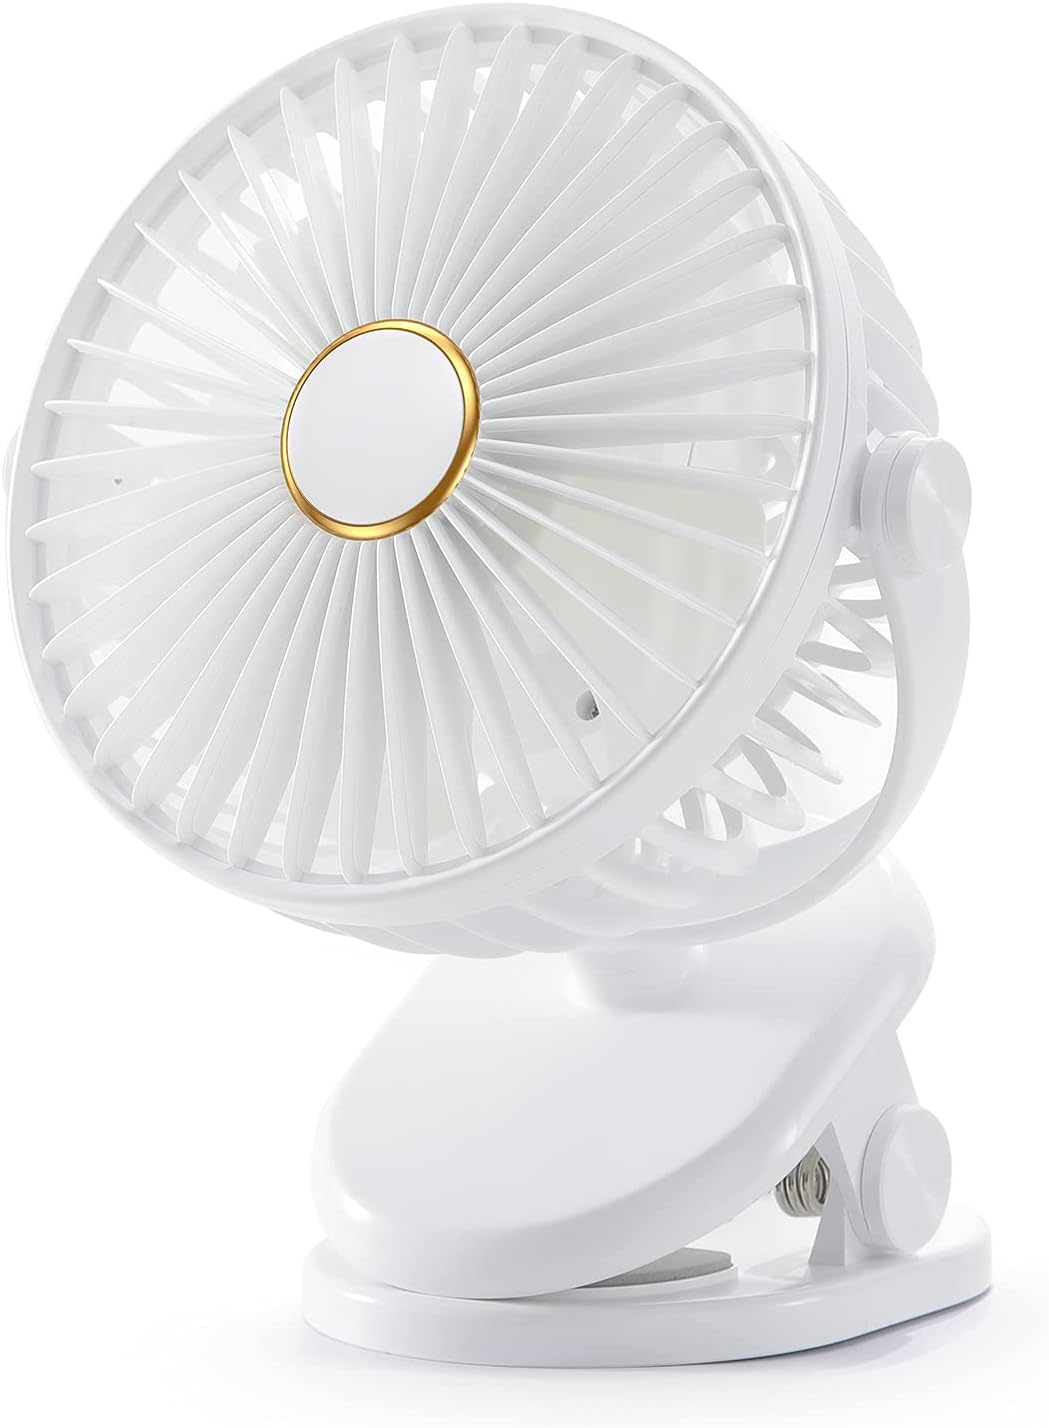 SmartDevil Clip on Fan, 360° Rotation Portable Small Desk Fan, 3 Speed Personal Rechargeable Battery Operated Table Fan with Clip, Mini Clip Fan for Stroller, Camping, Office, Desk(White)